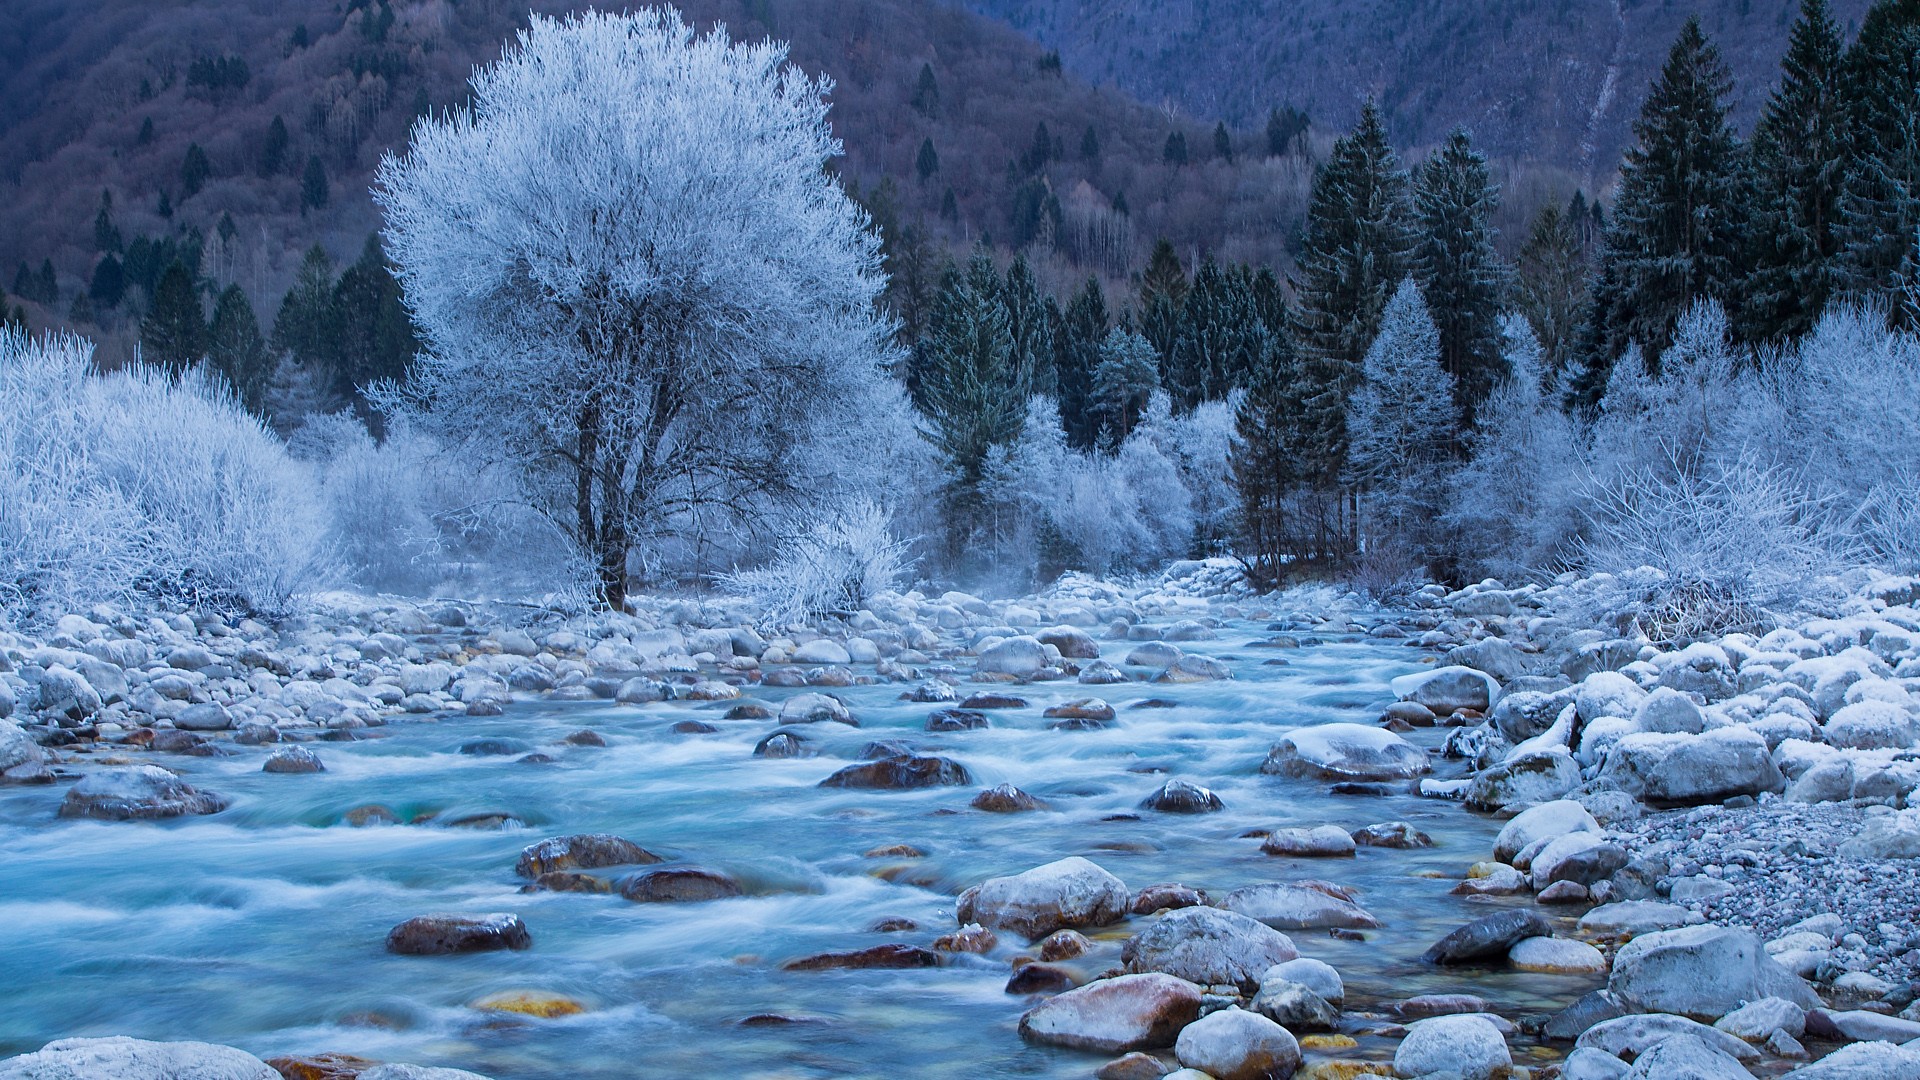 General 1920x1080 nature landscape trees forest mountains rocks water spring long exposure winter river Soča River Slovenia